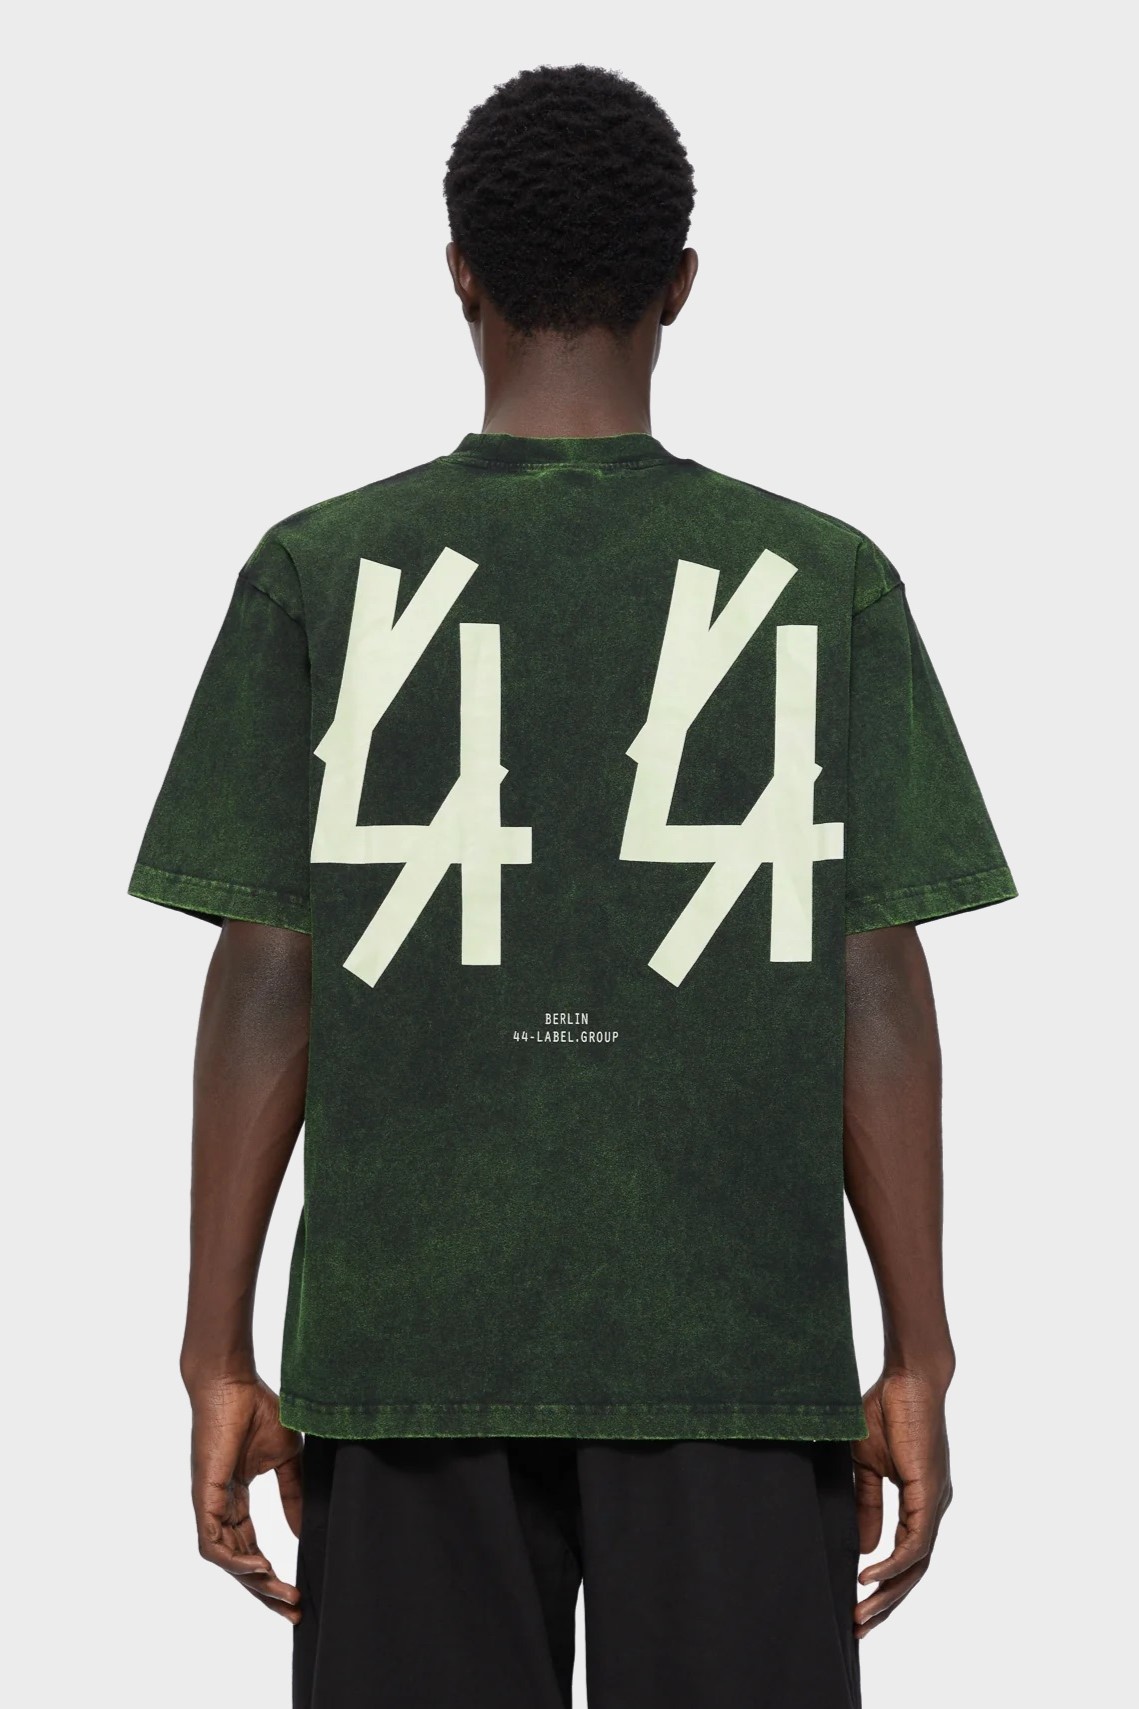 44 LABEL GROUP Overdied Solar Tee in Green 2XL